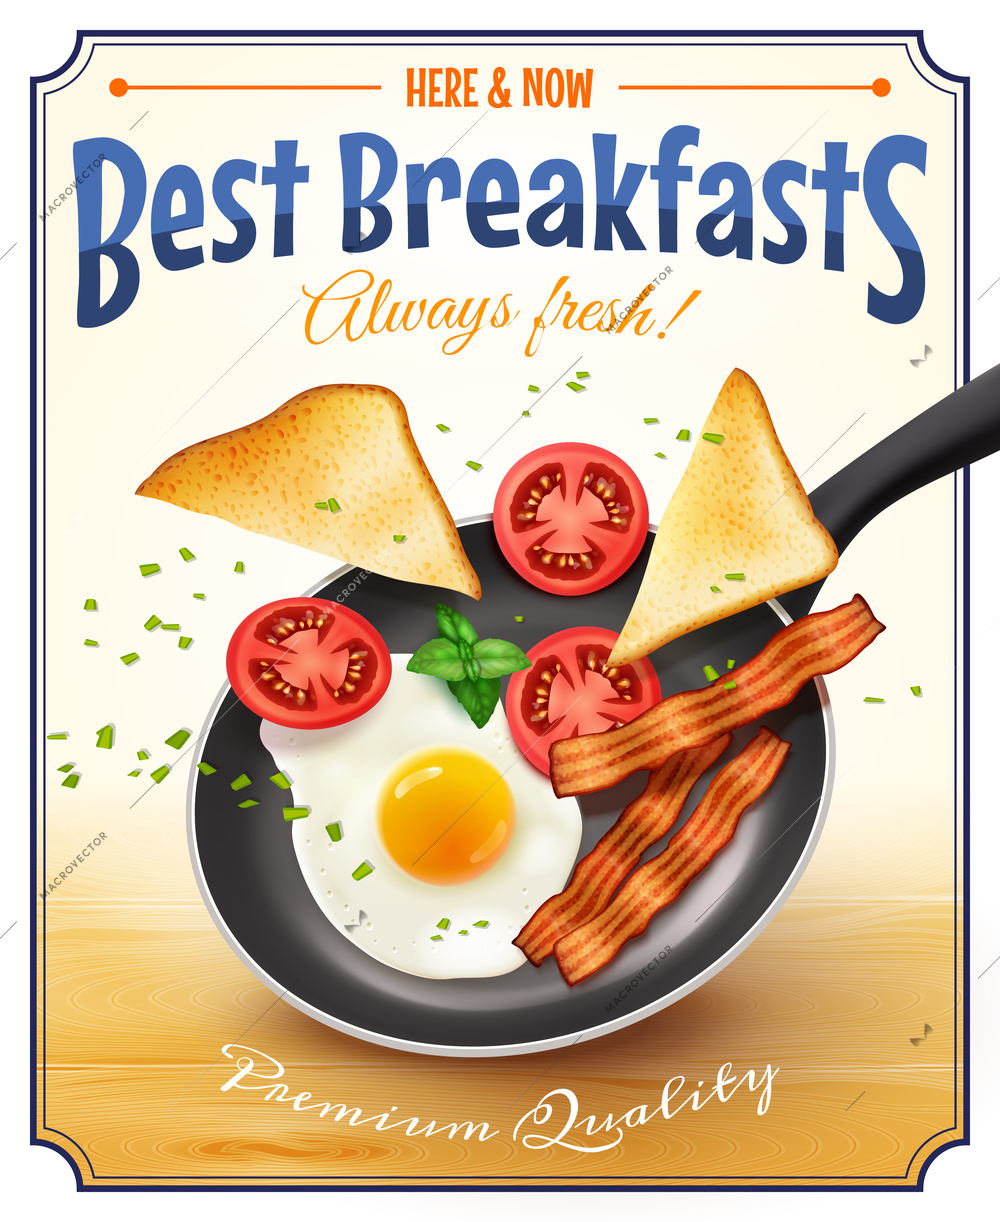 Cafe restaurant best breakfast advertisement poster with traditional american fried egg bacon bread tomatoes retro vector illustration